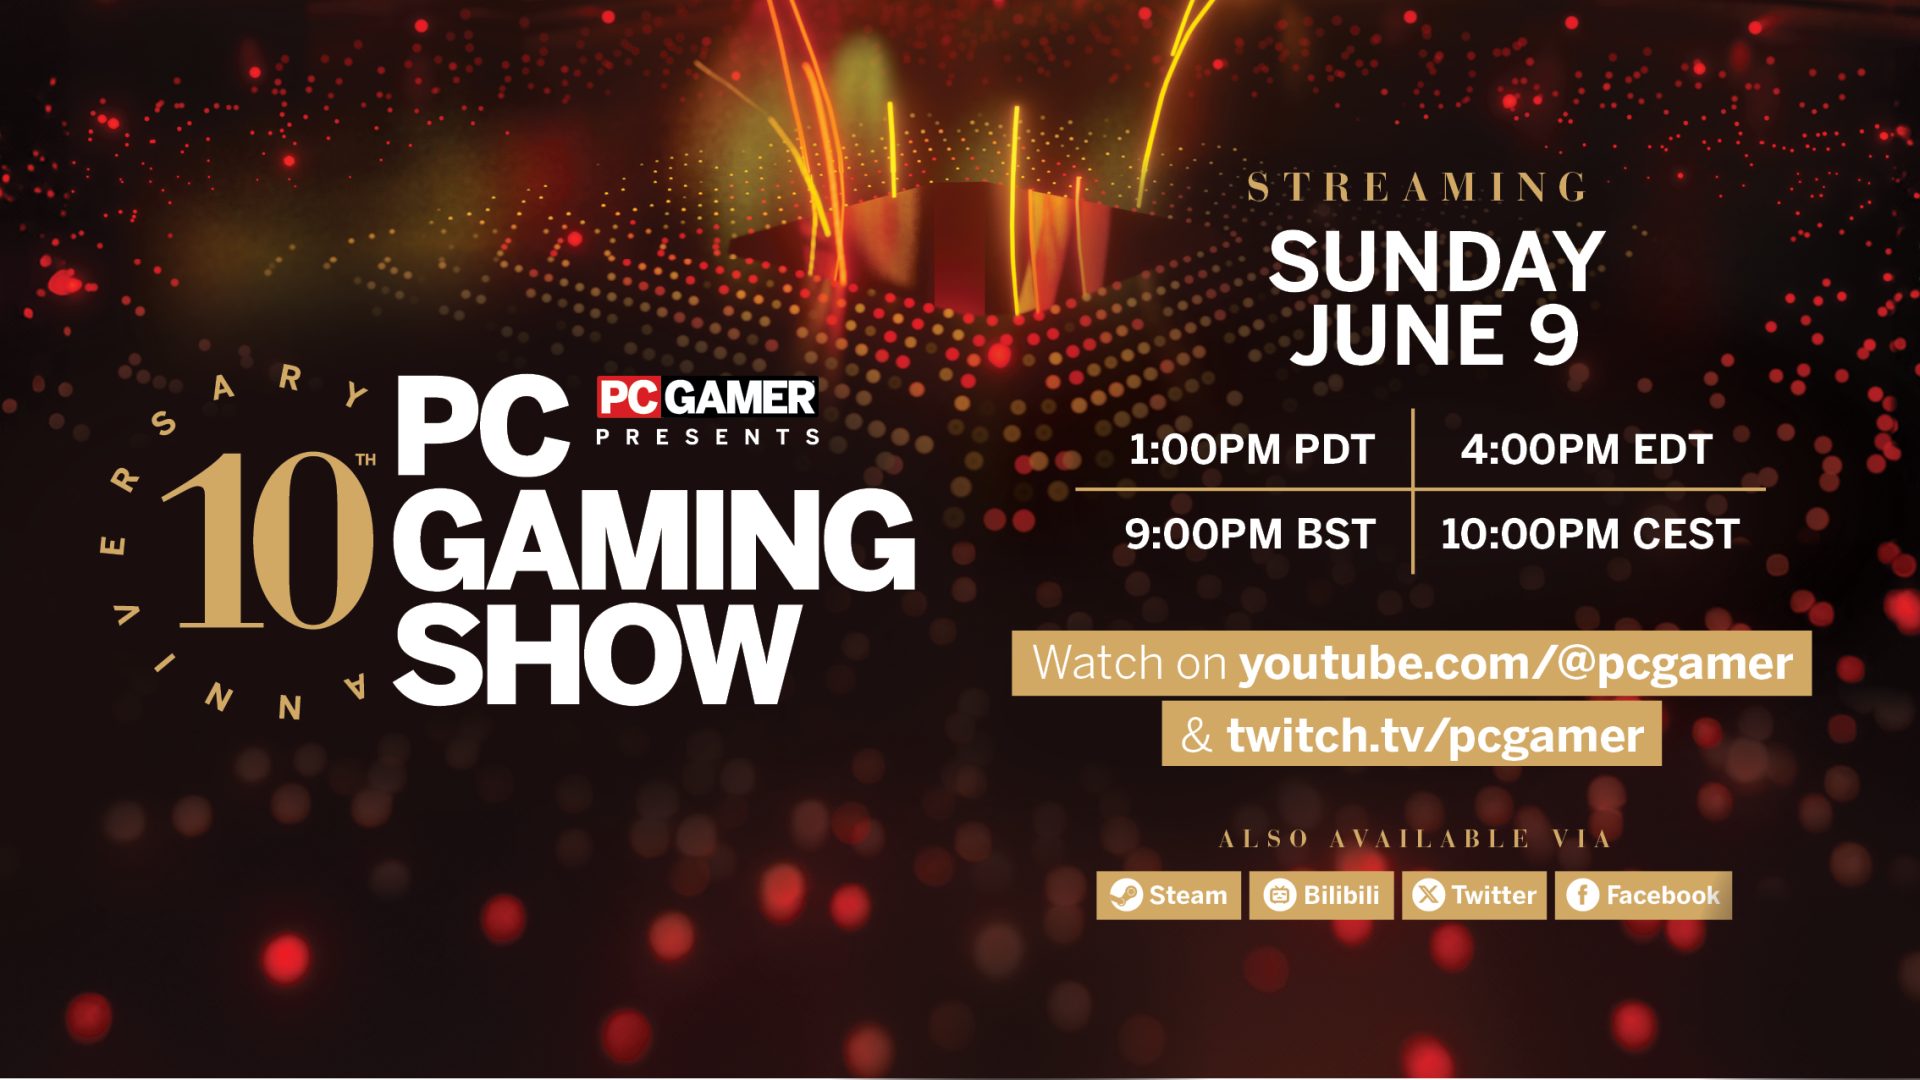 PC Gaming Show returns in June, with “over 50 games” and world premiere announcements